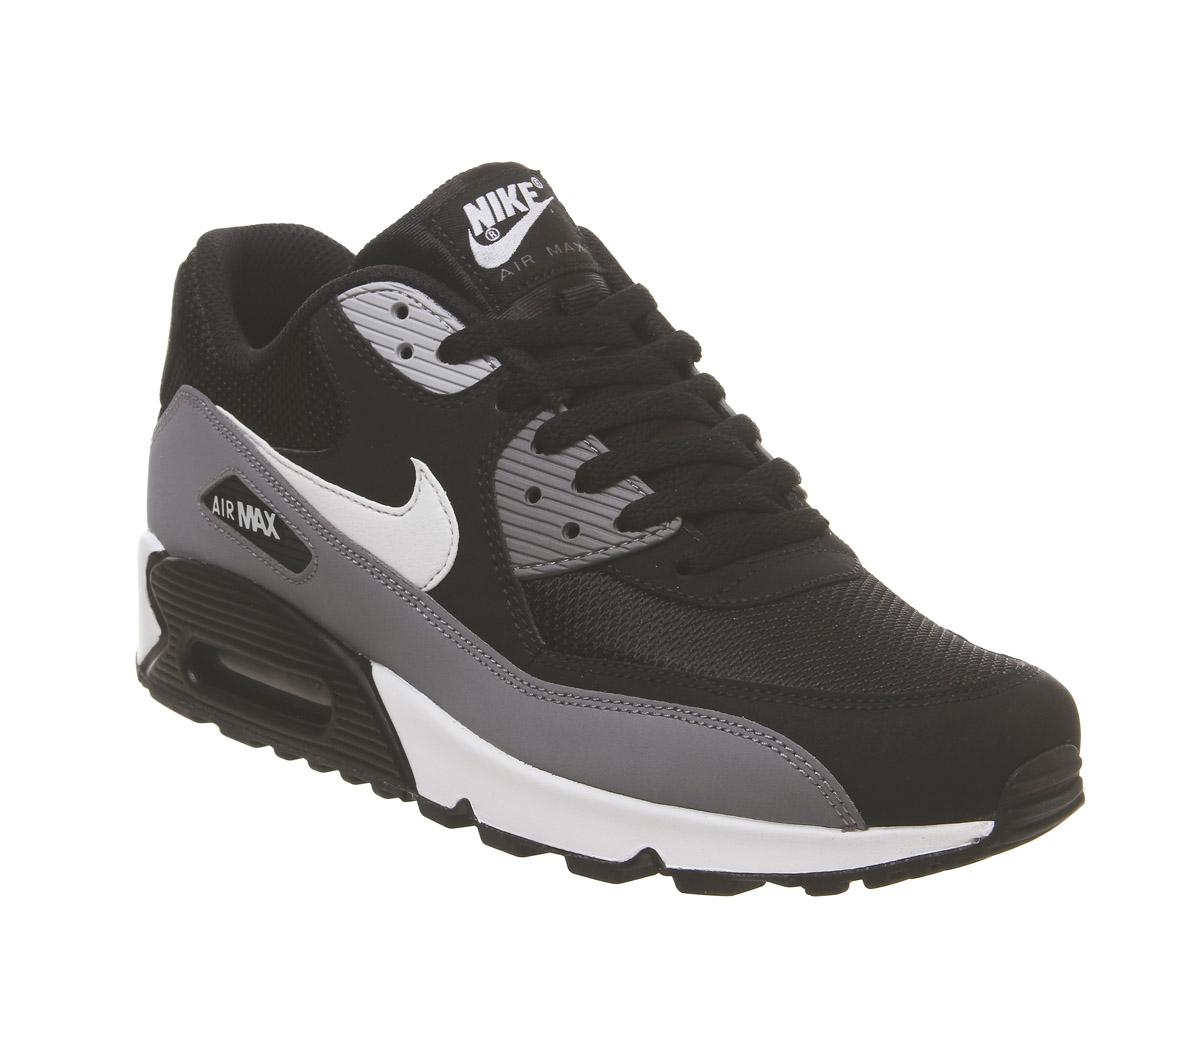 NikeAir Max 90 TrainersBlack White Cool Grey Anthracite